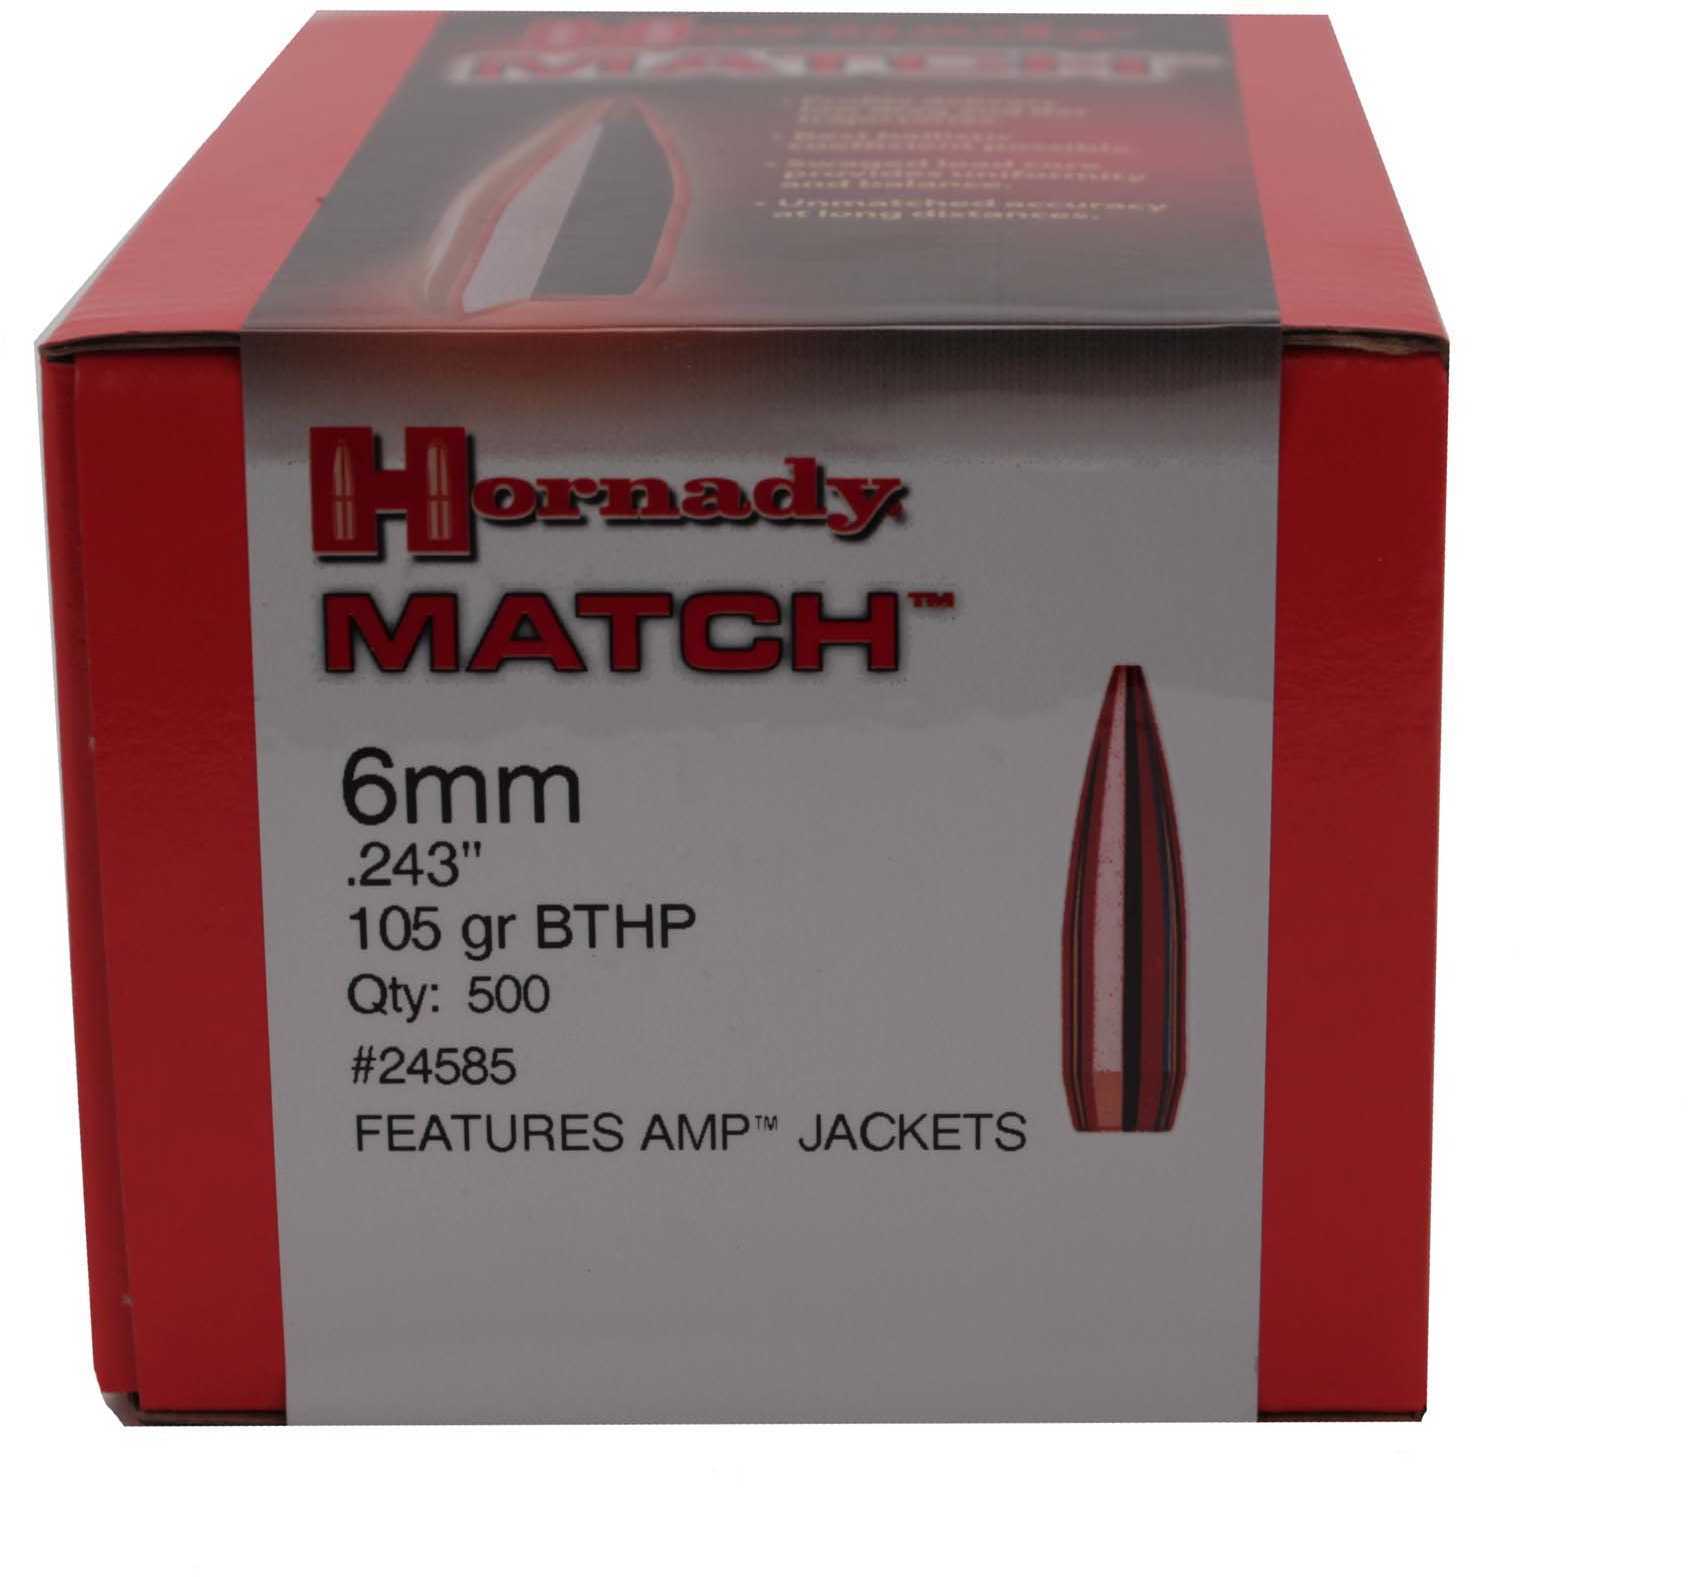 Hornady 24585 Match 6mm .243 105 GR Boat Tail Hollow Point 500 Box